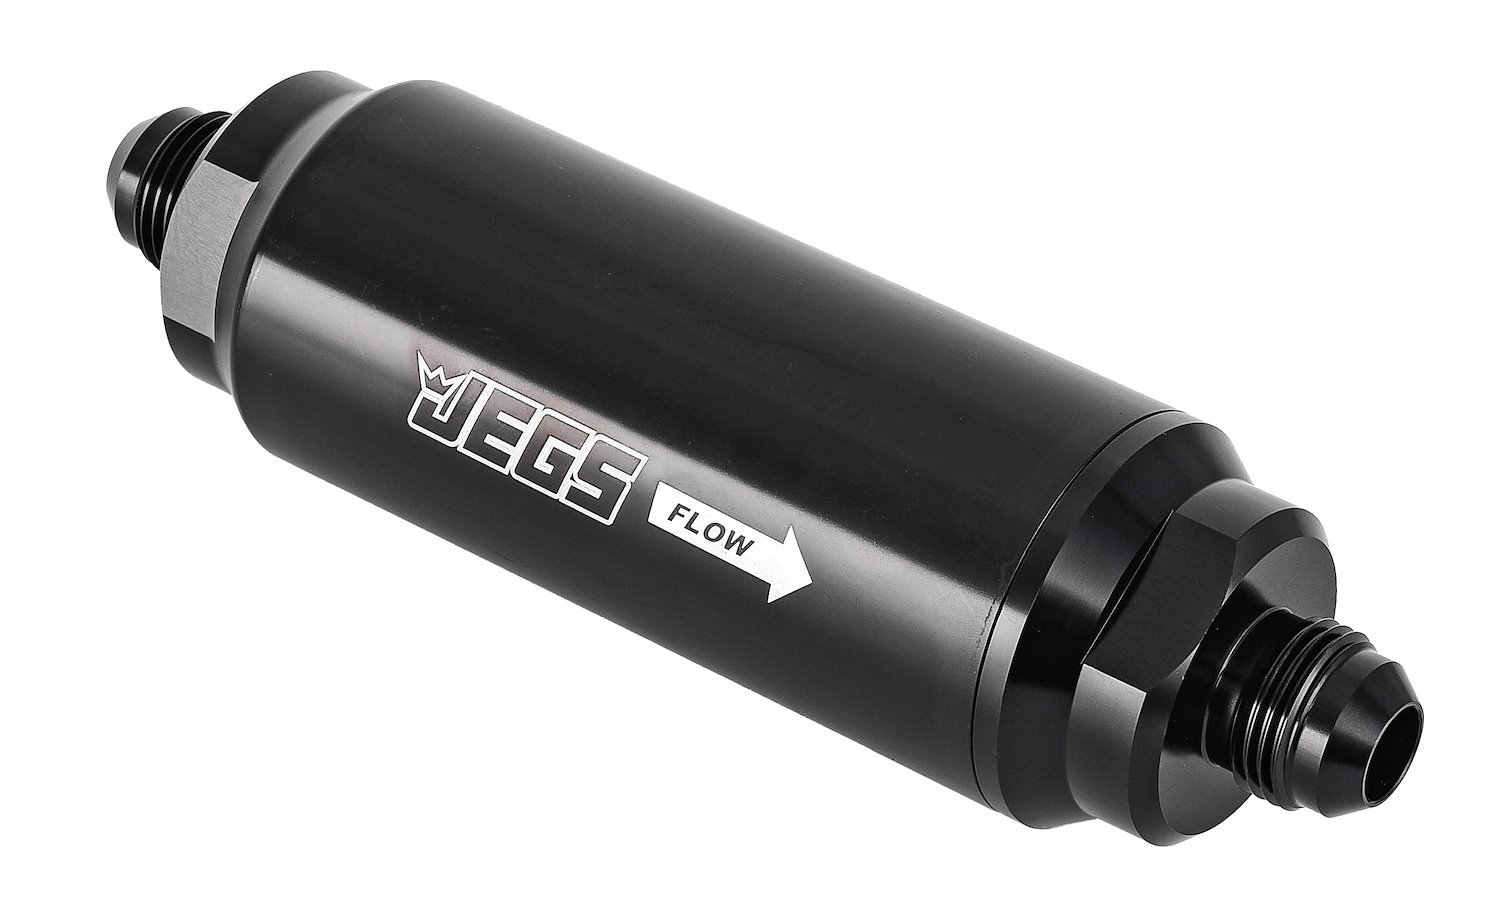 Billet Aluminum In-Line Fuel Filter for Gas, E85 & Alcohol Applications, 5 in. Long [-8 AN Black]